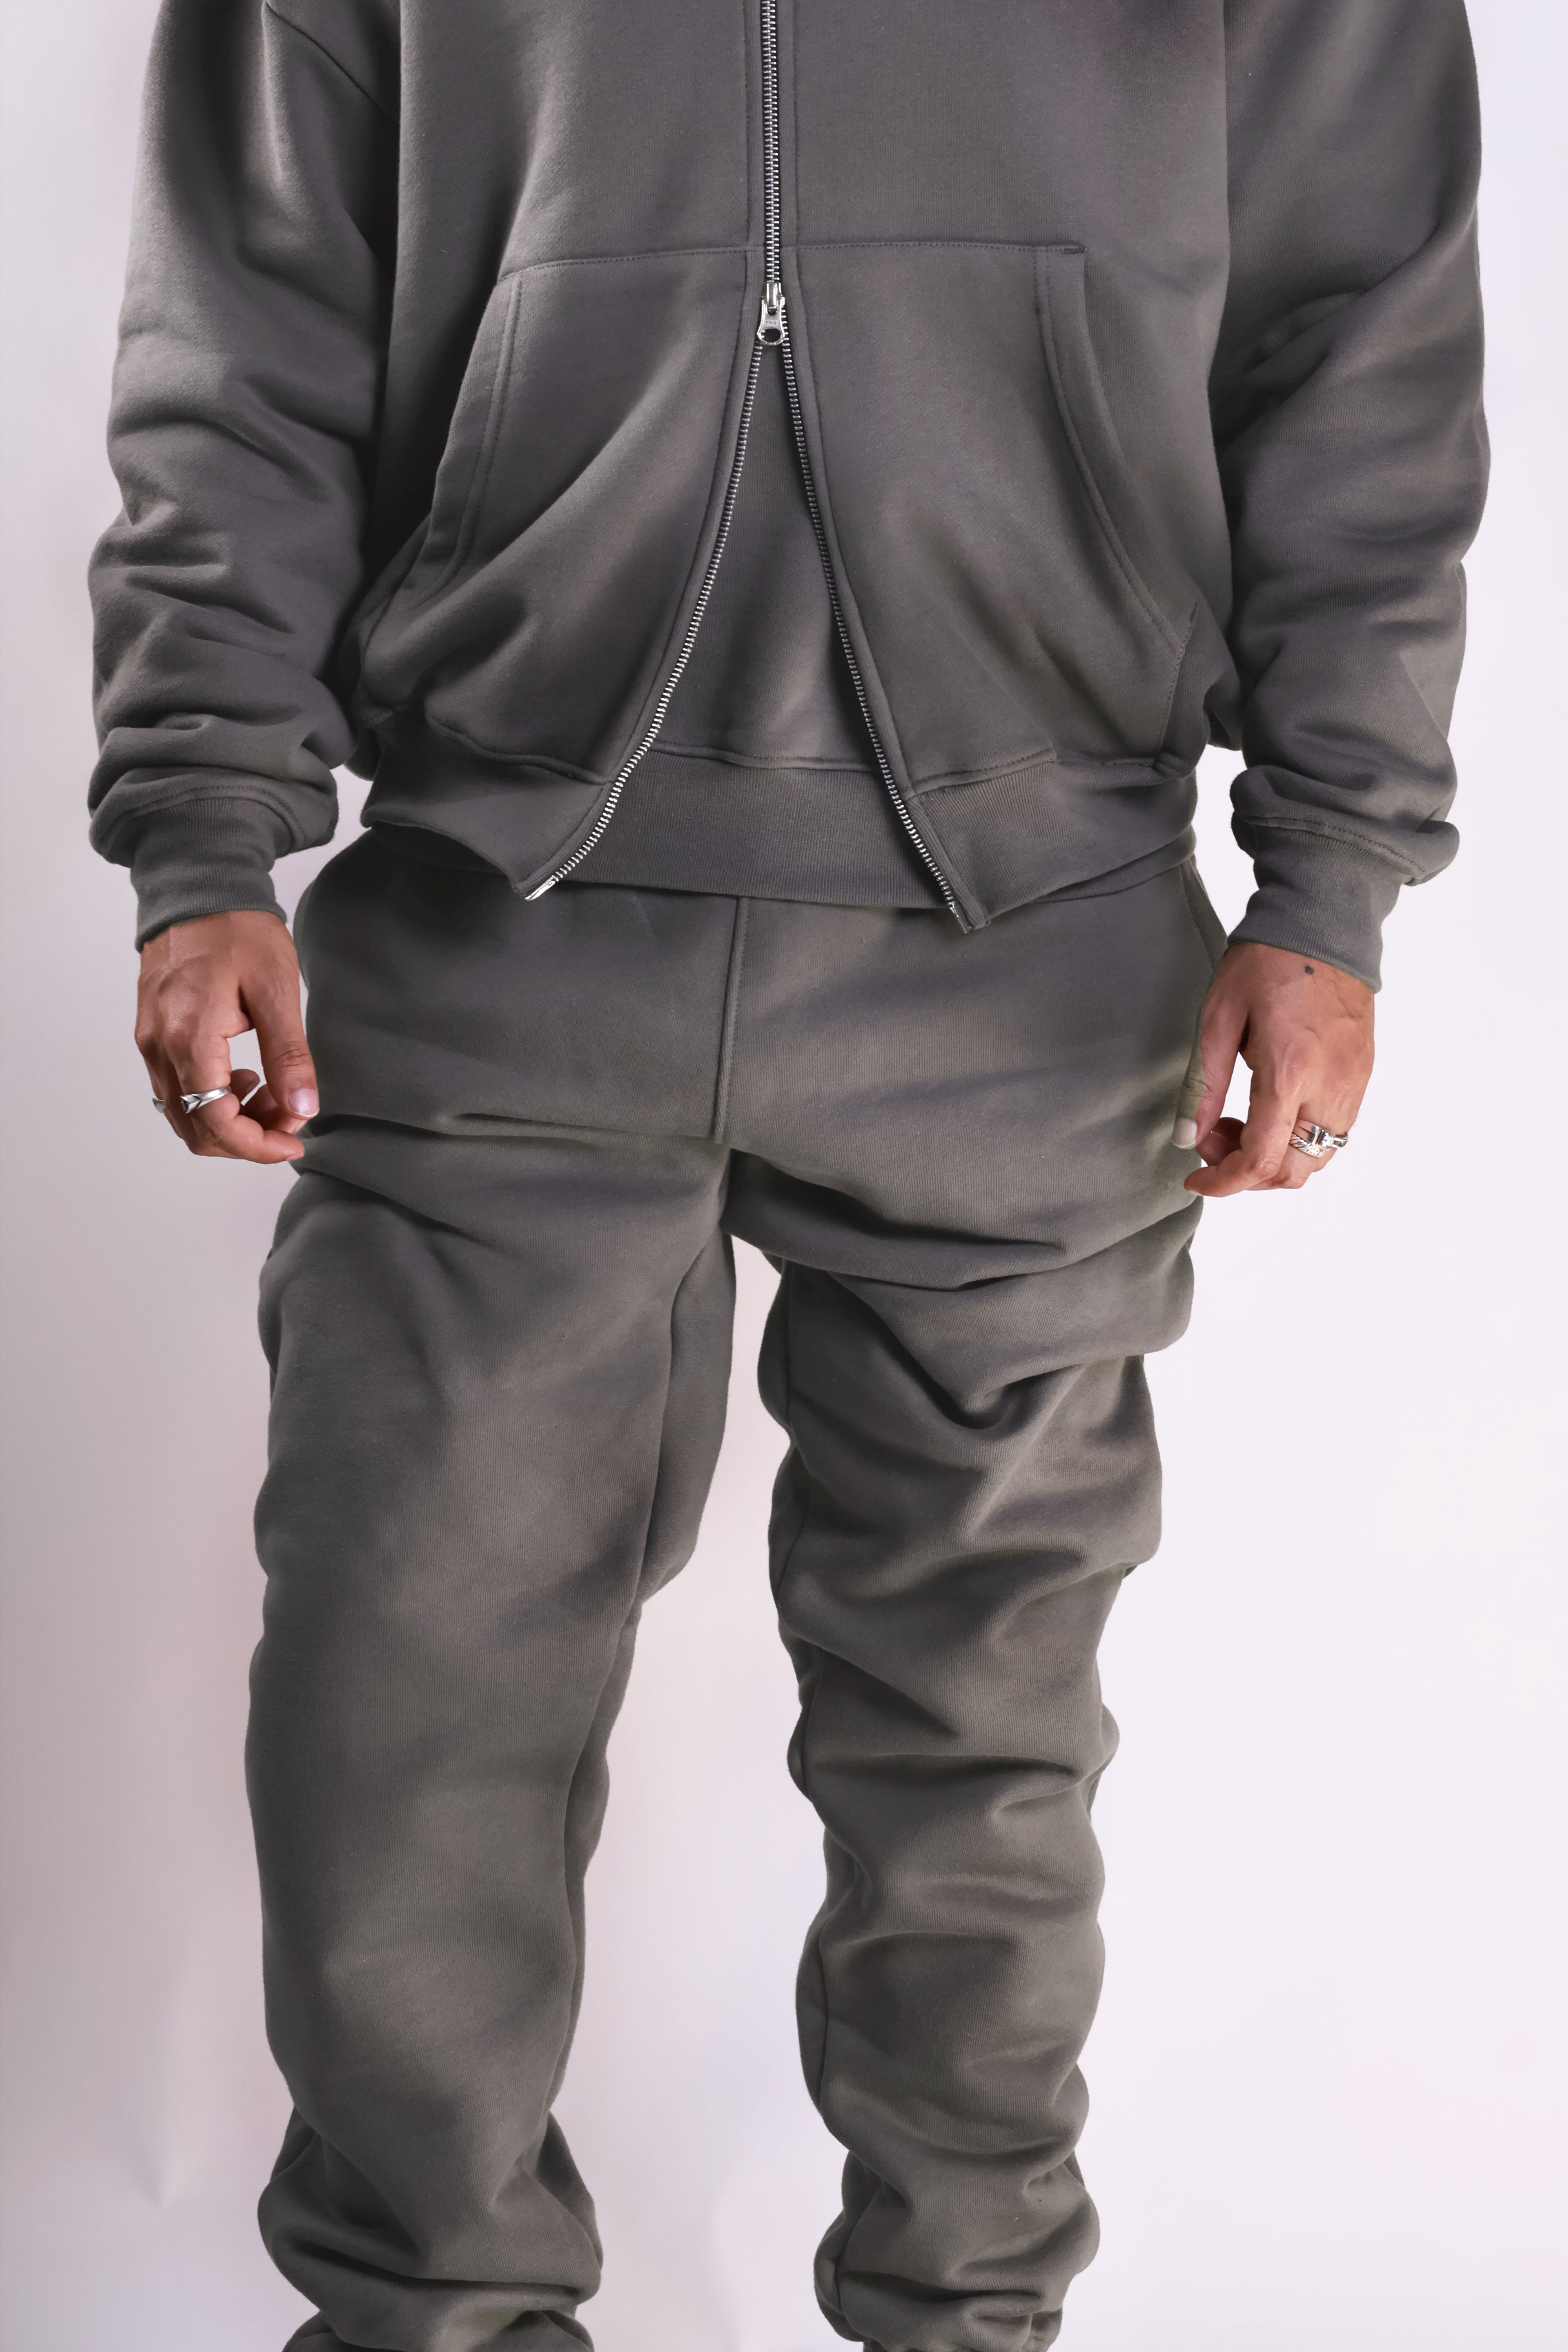 SE465 Oversized Sweat Pants Charcoal Grey (February Delivery)